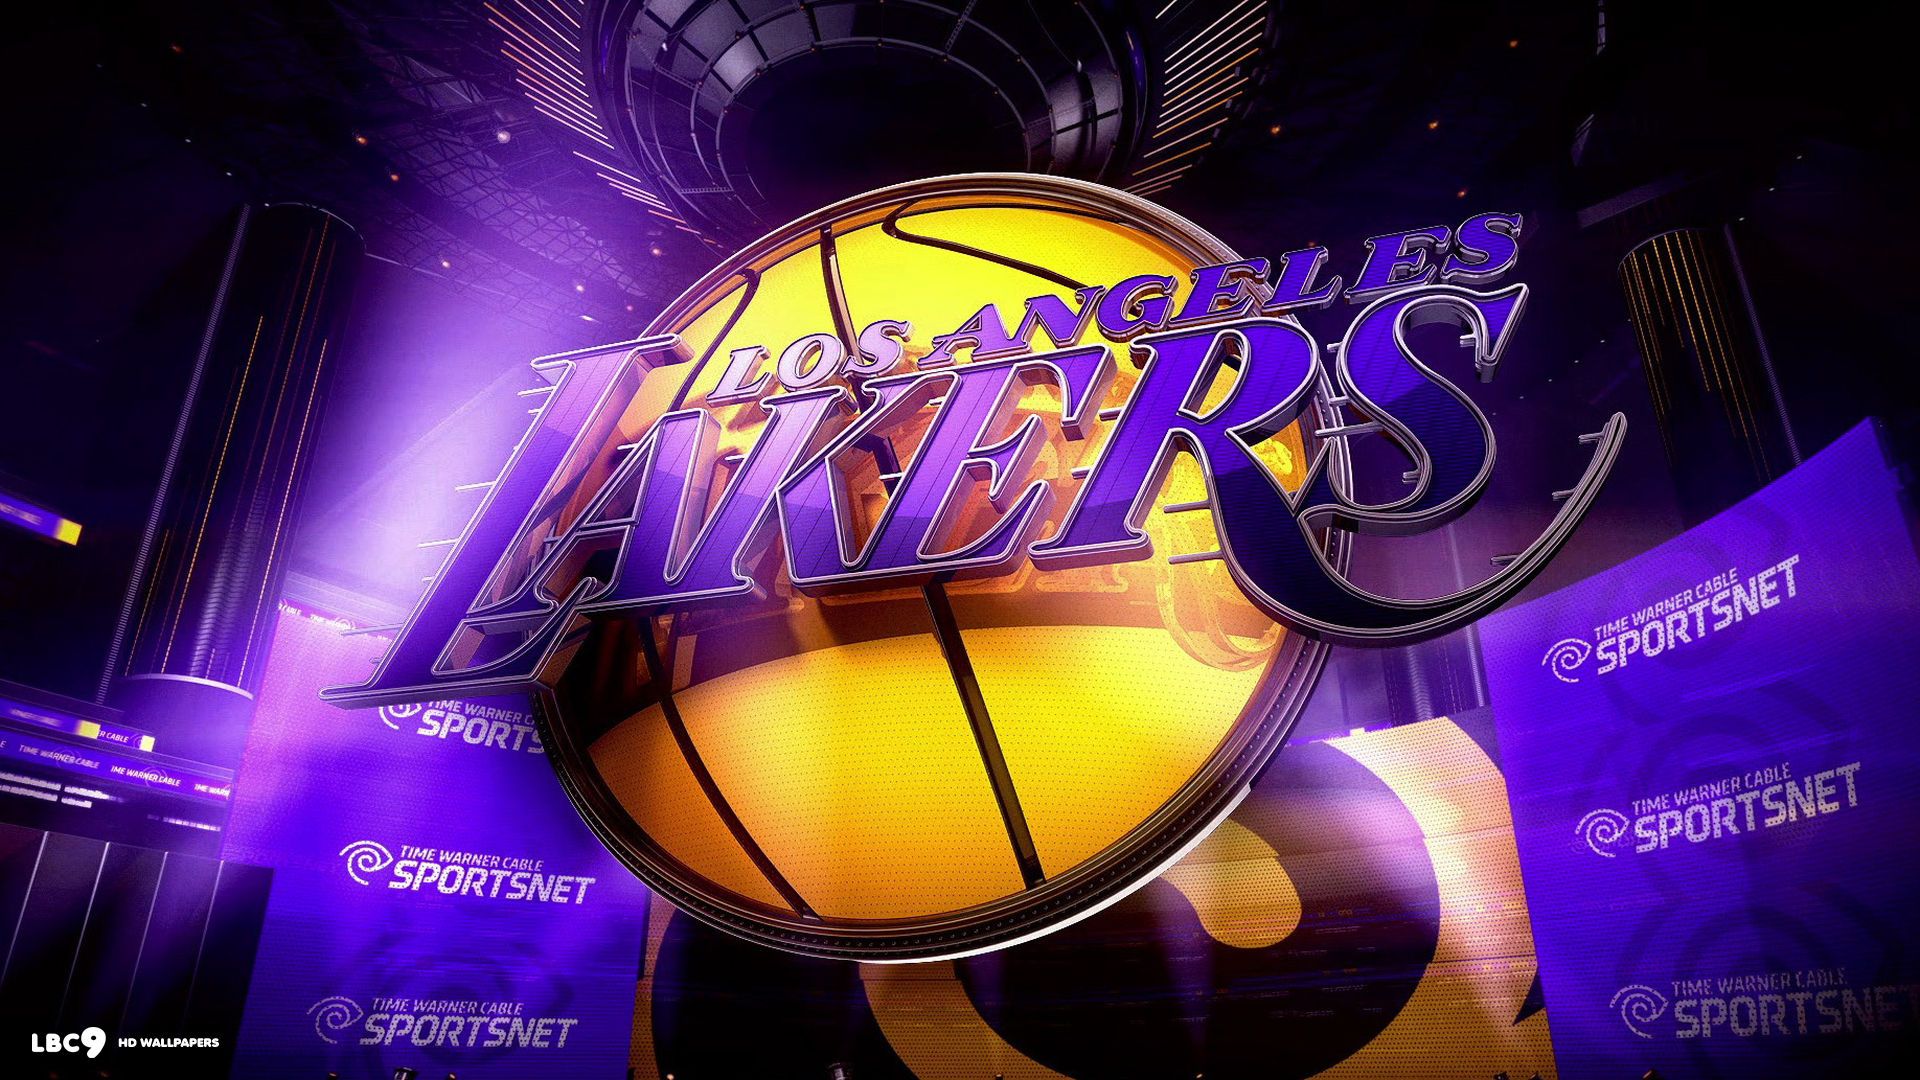 Lakers hd s on